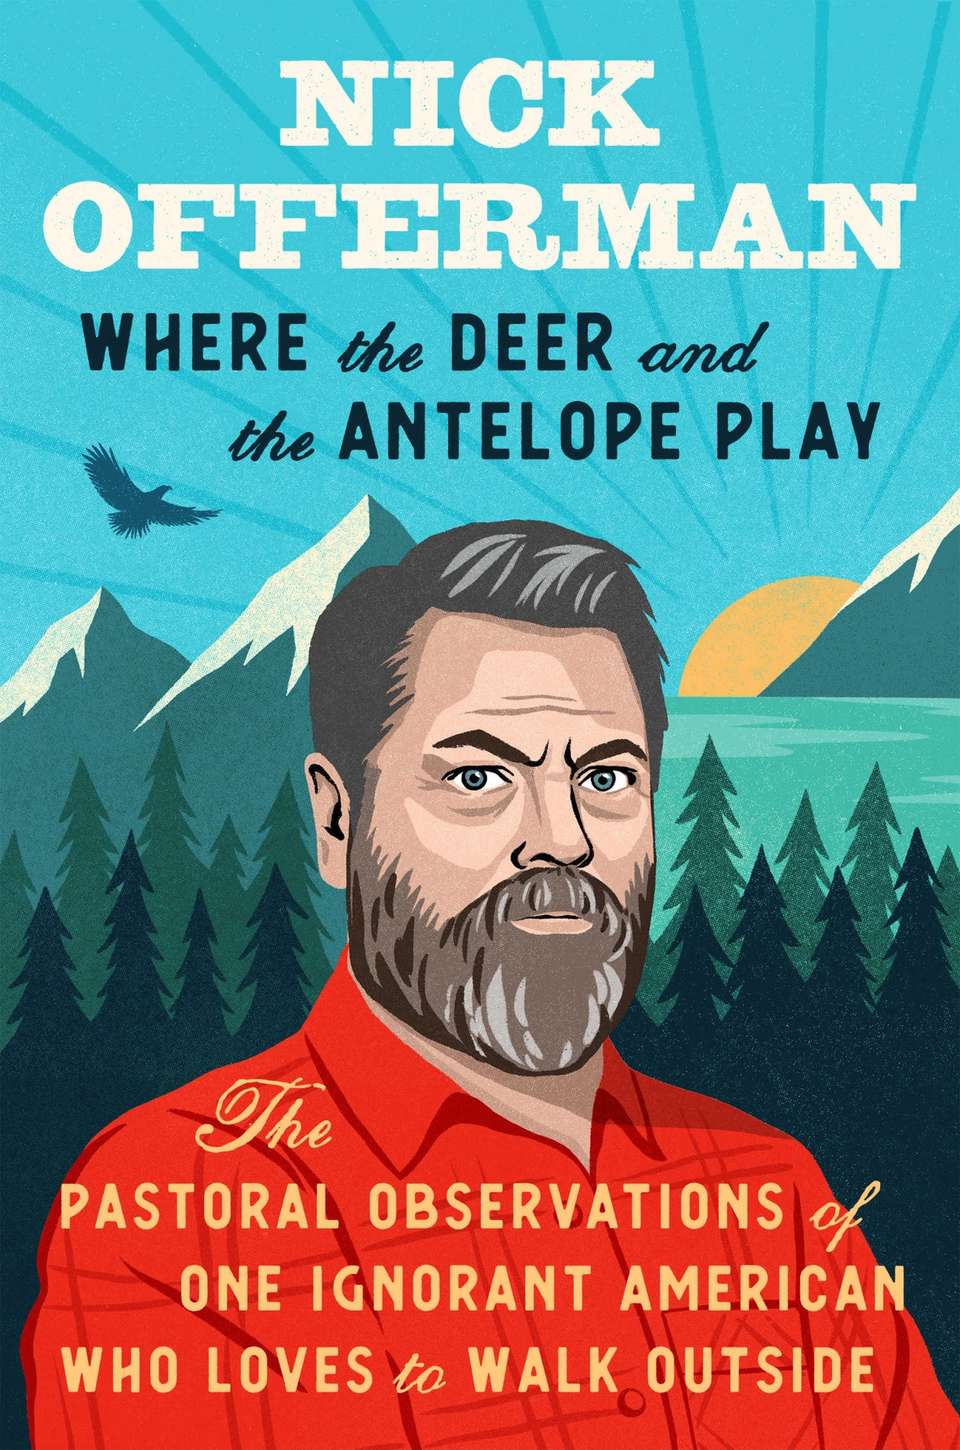 Book cover with illustration of Nick Offerman, in the great outdoors, wearing a red shirt.